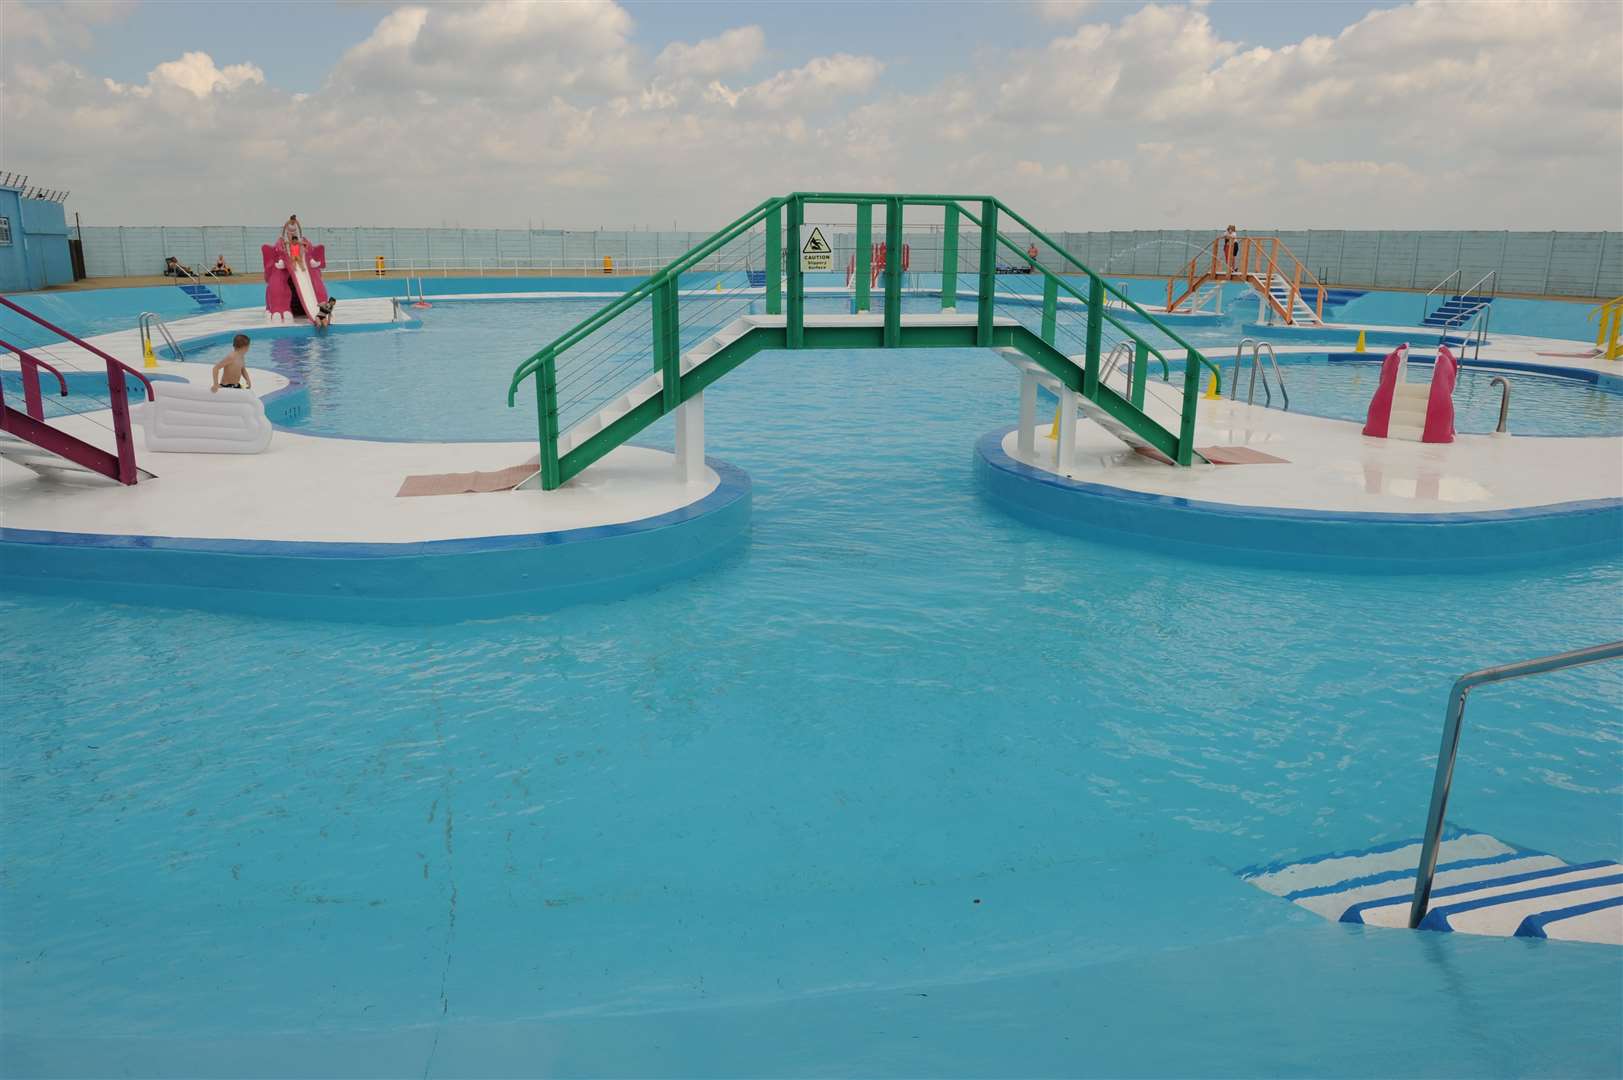 The lido and paddling pool are one of the many family attractions at The Strand